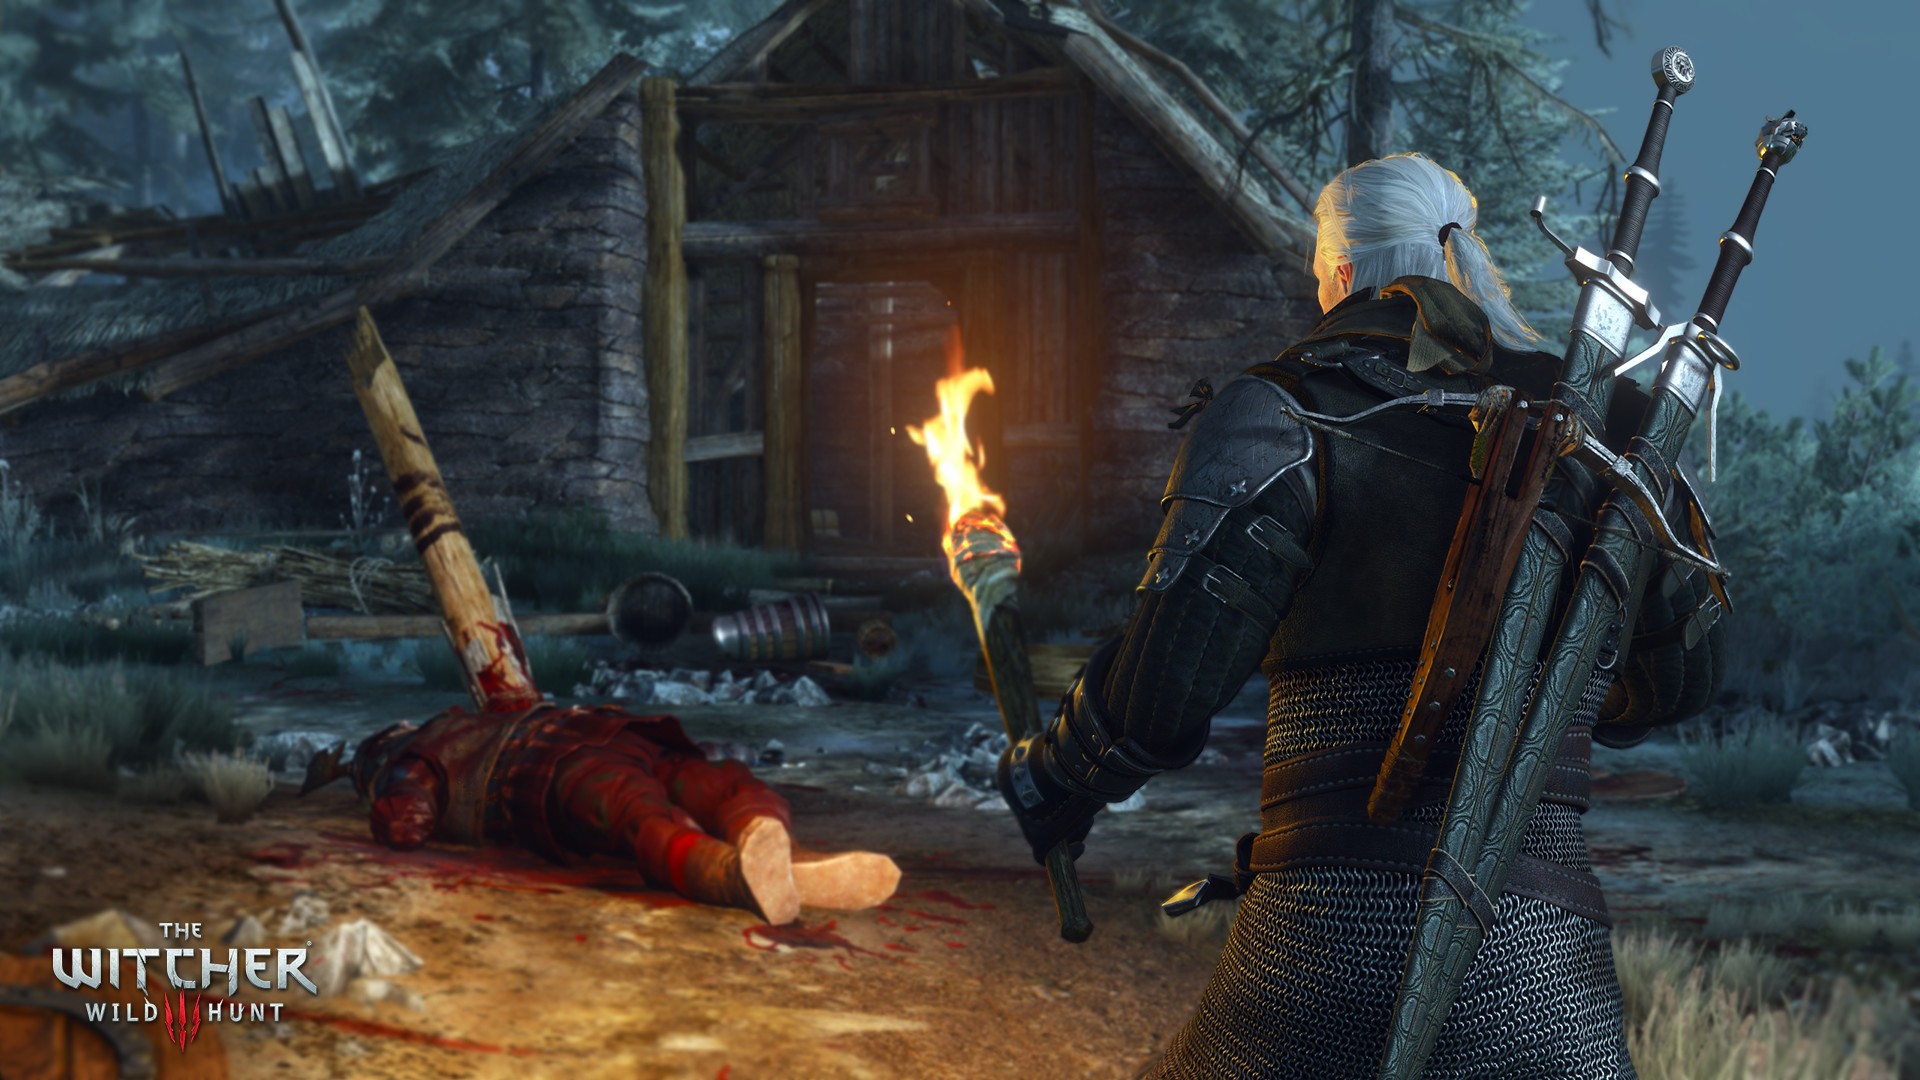 Geralt of Rivia, The Witcher 3: Wild Hunt, PC gaming, CD Projekt RED Wallpaper